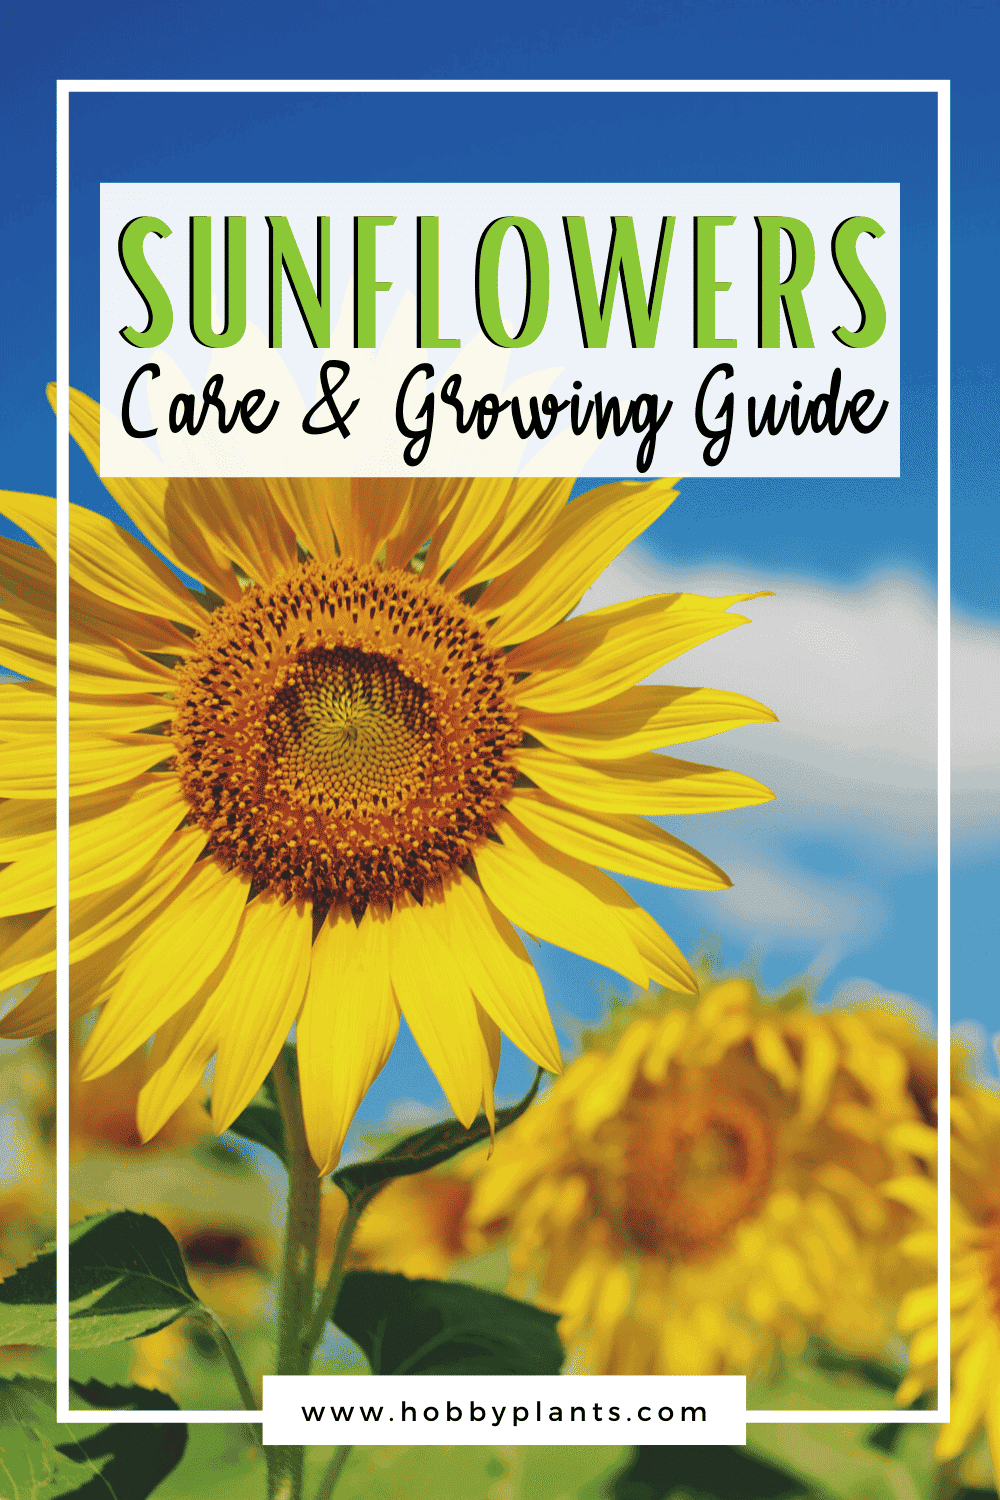 Sunflowers Care & Growing Guide